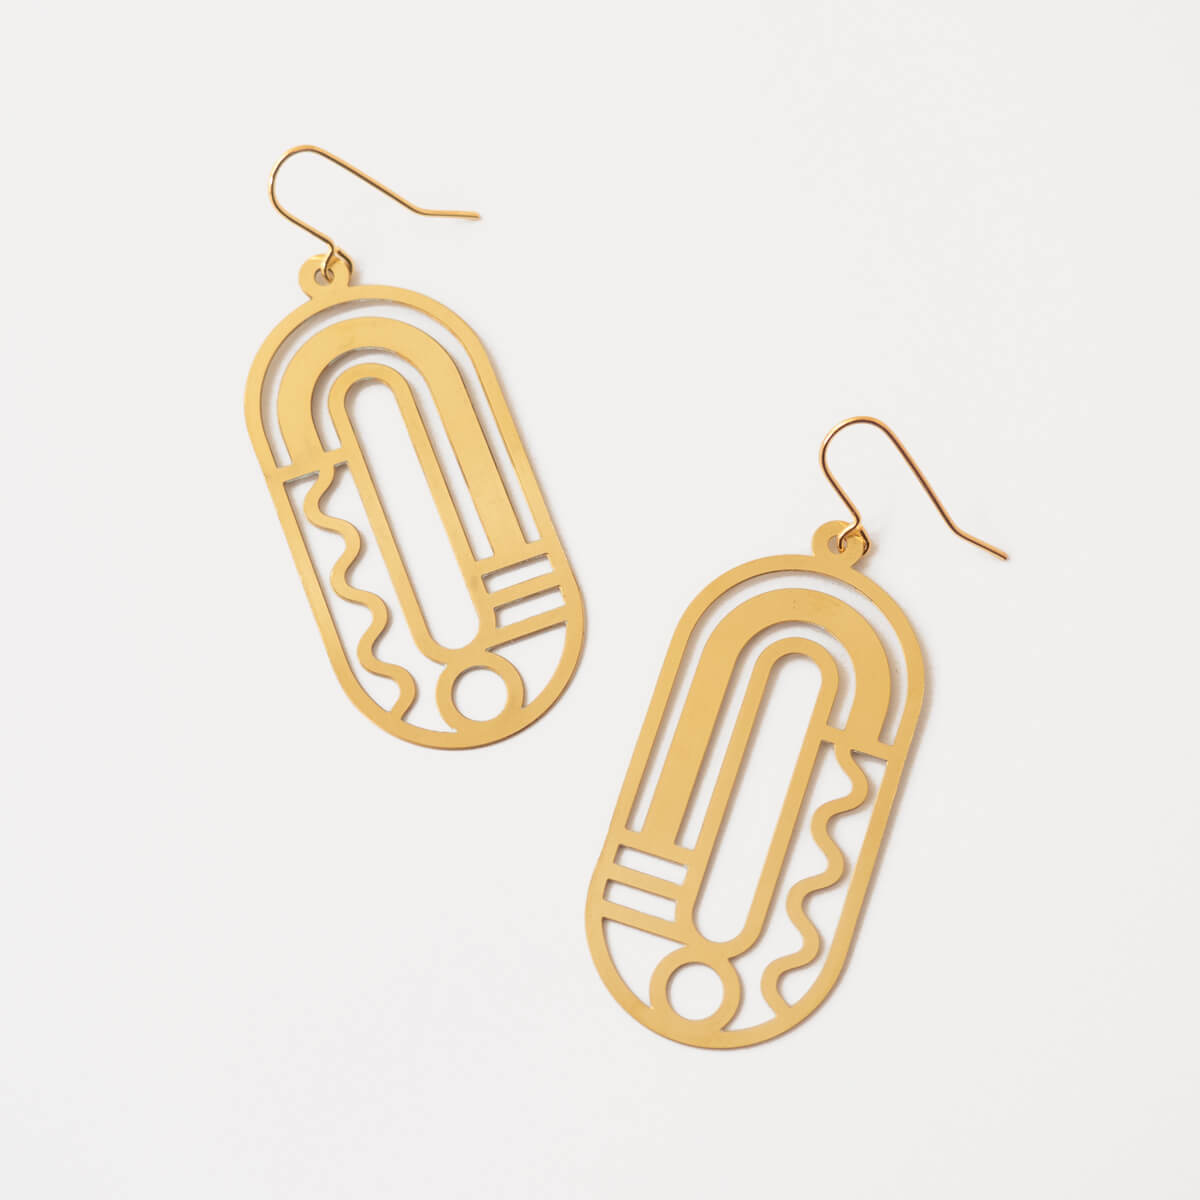 Mina Earrings | Large Statement Earrings | Curious Makers